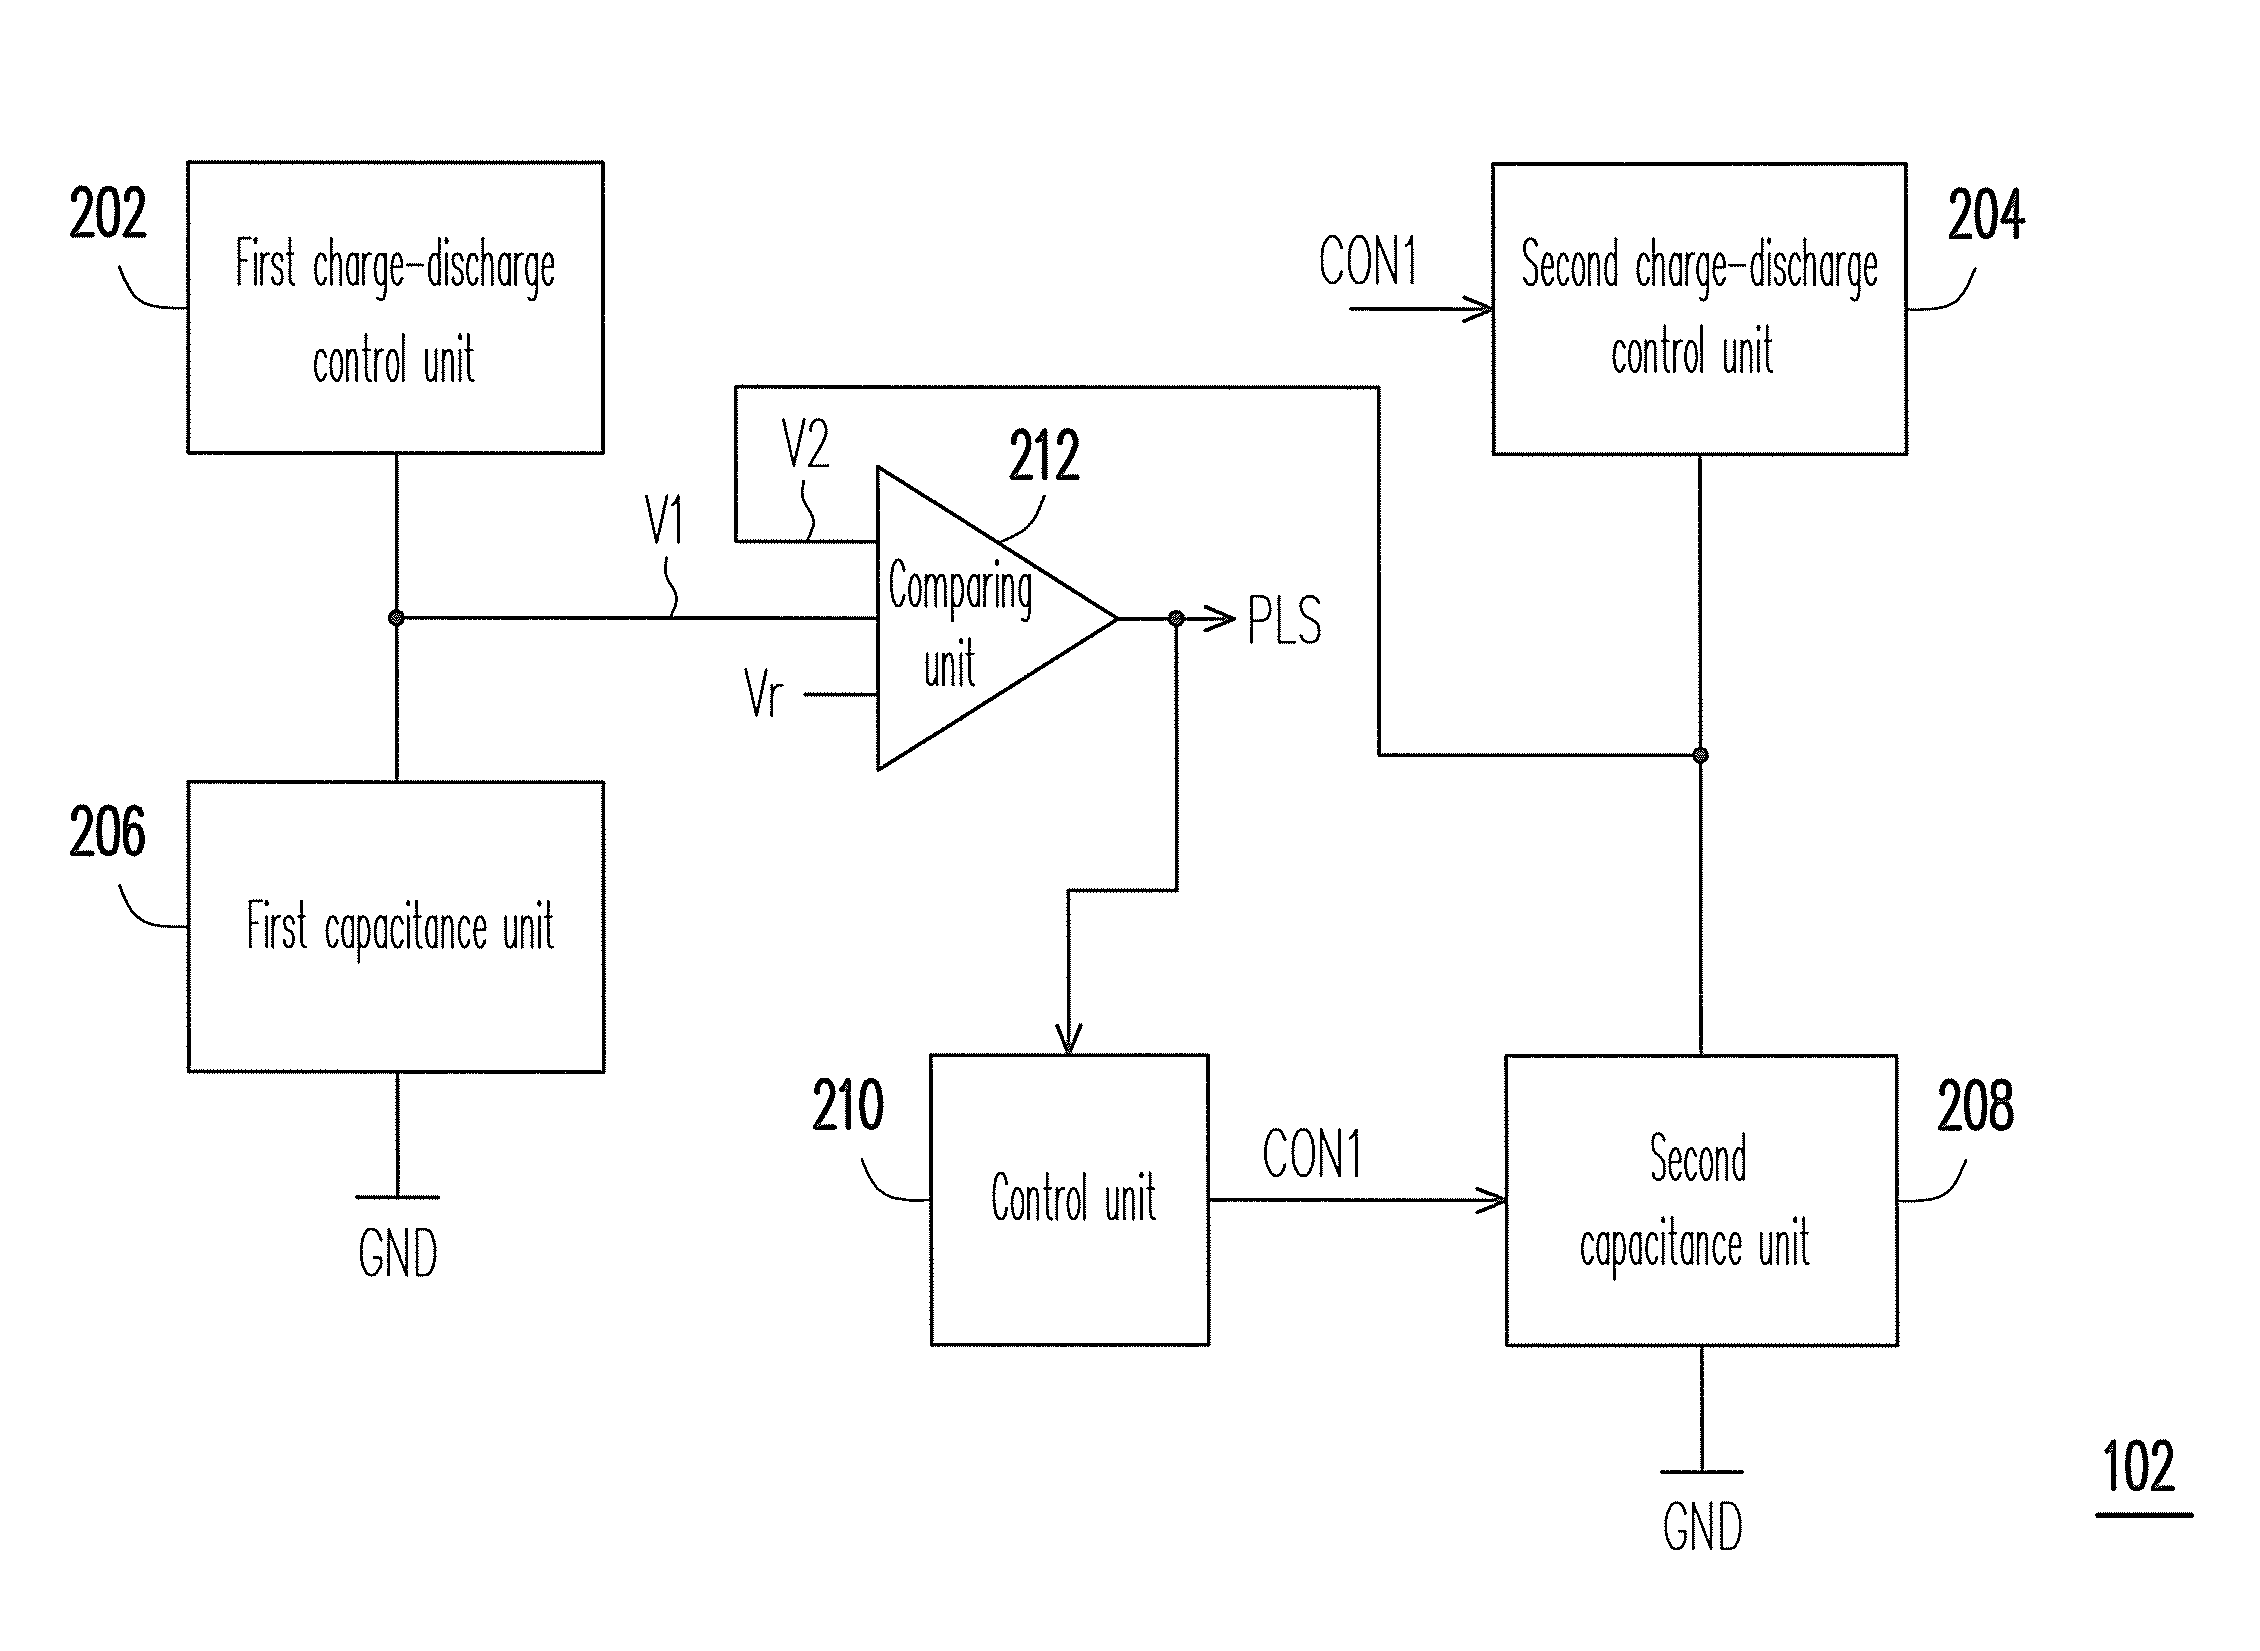 Frequency jitter controller for power converter